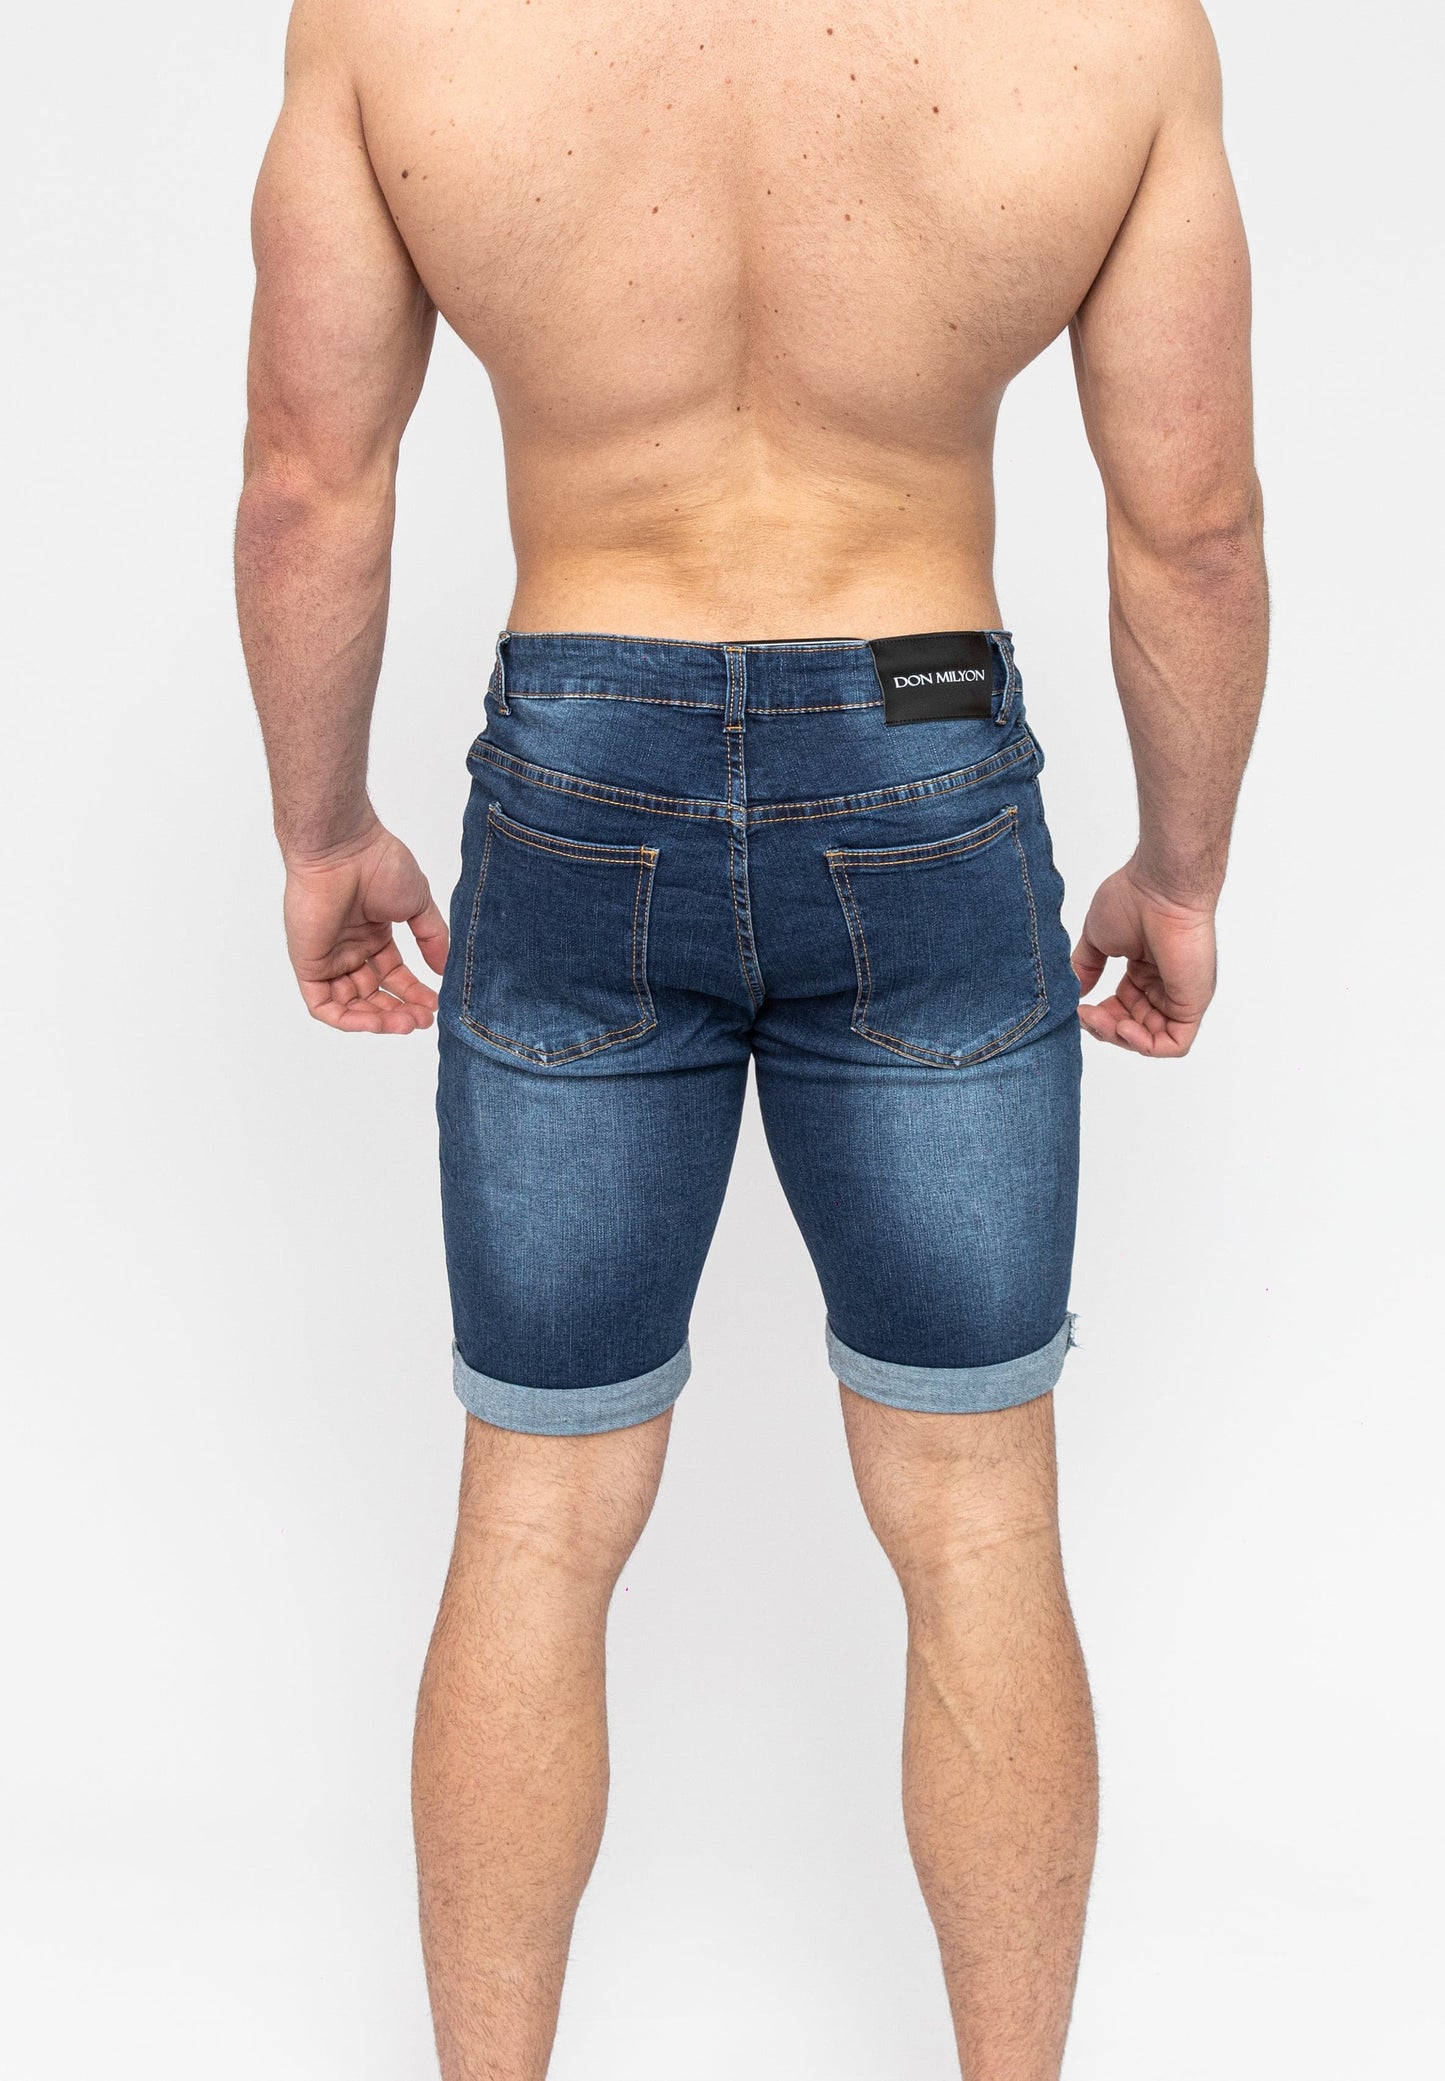 Blue Ripped Skinny Men's Jeans Shorts Rear Glutes